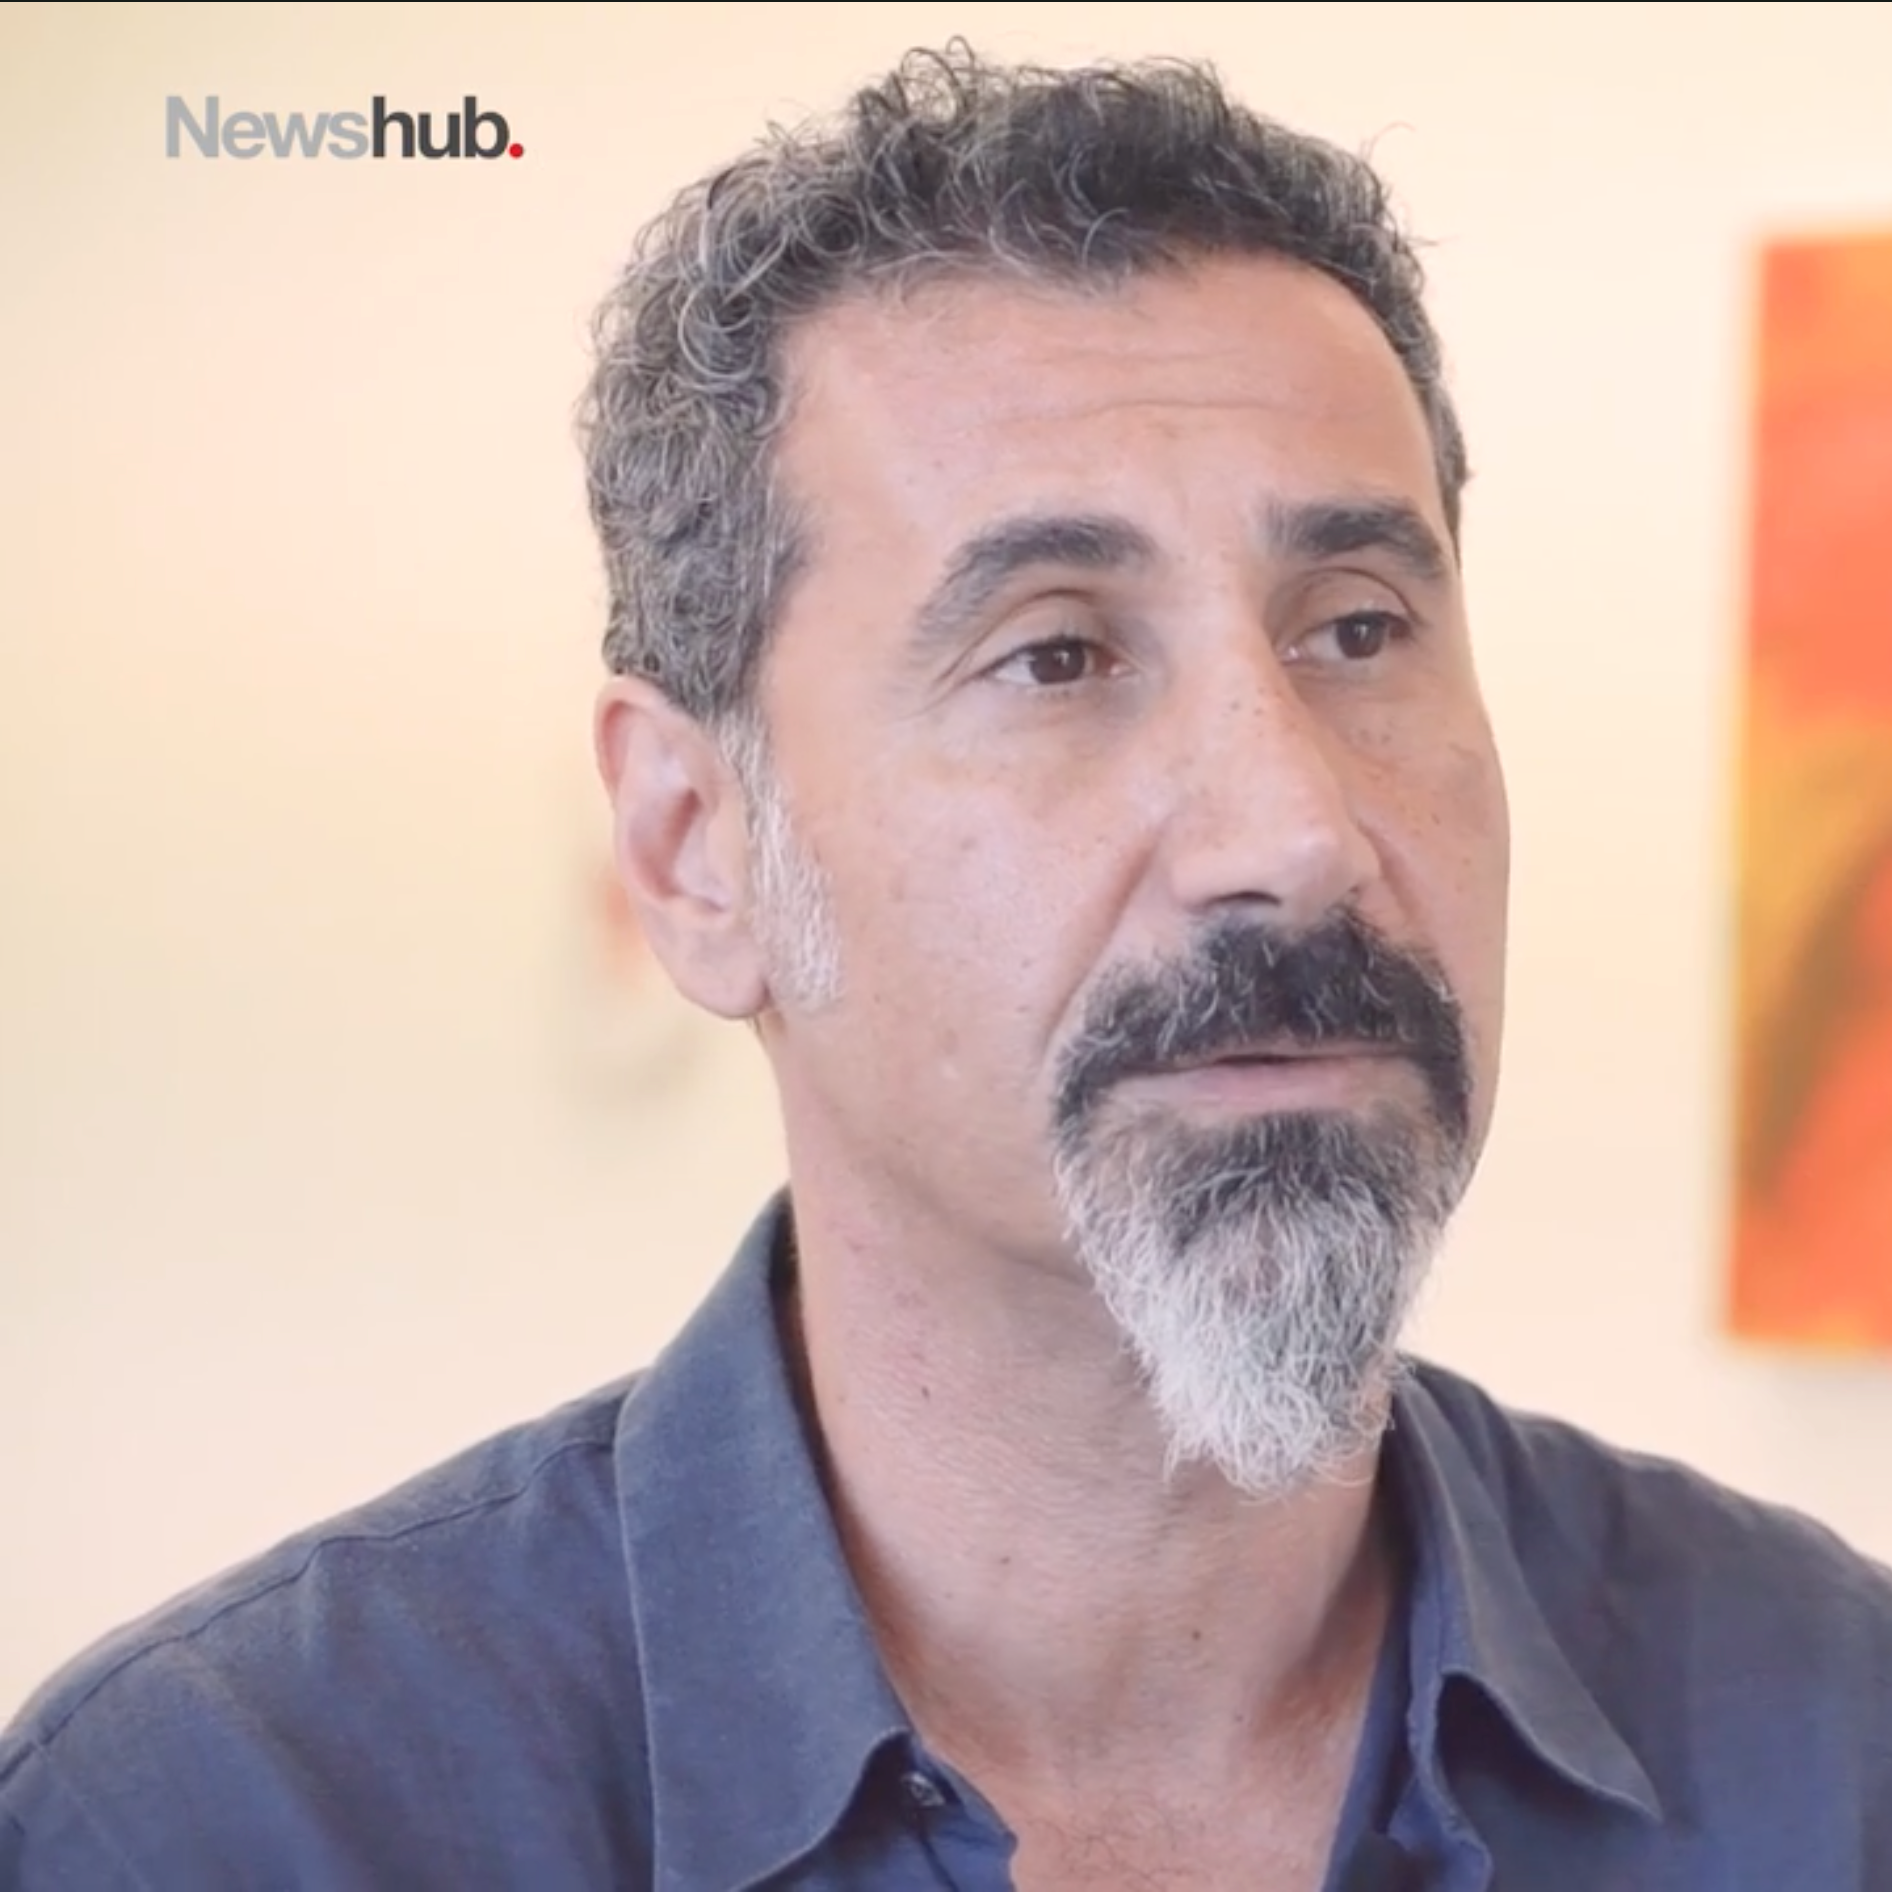 Wake Up: Serj Tankian From System of a Down's Artful Message To Kiwis On Genocide